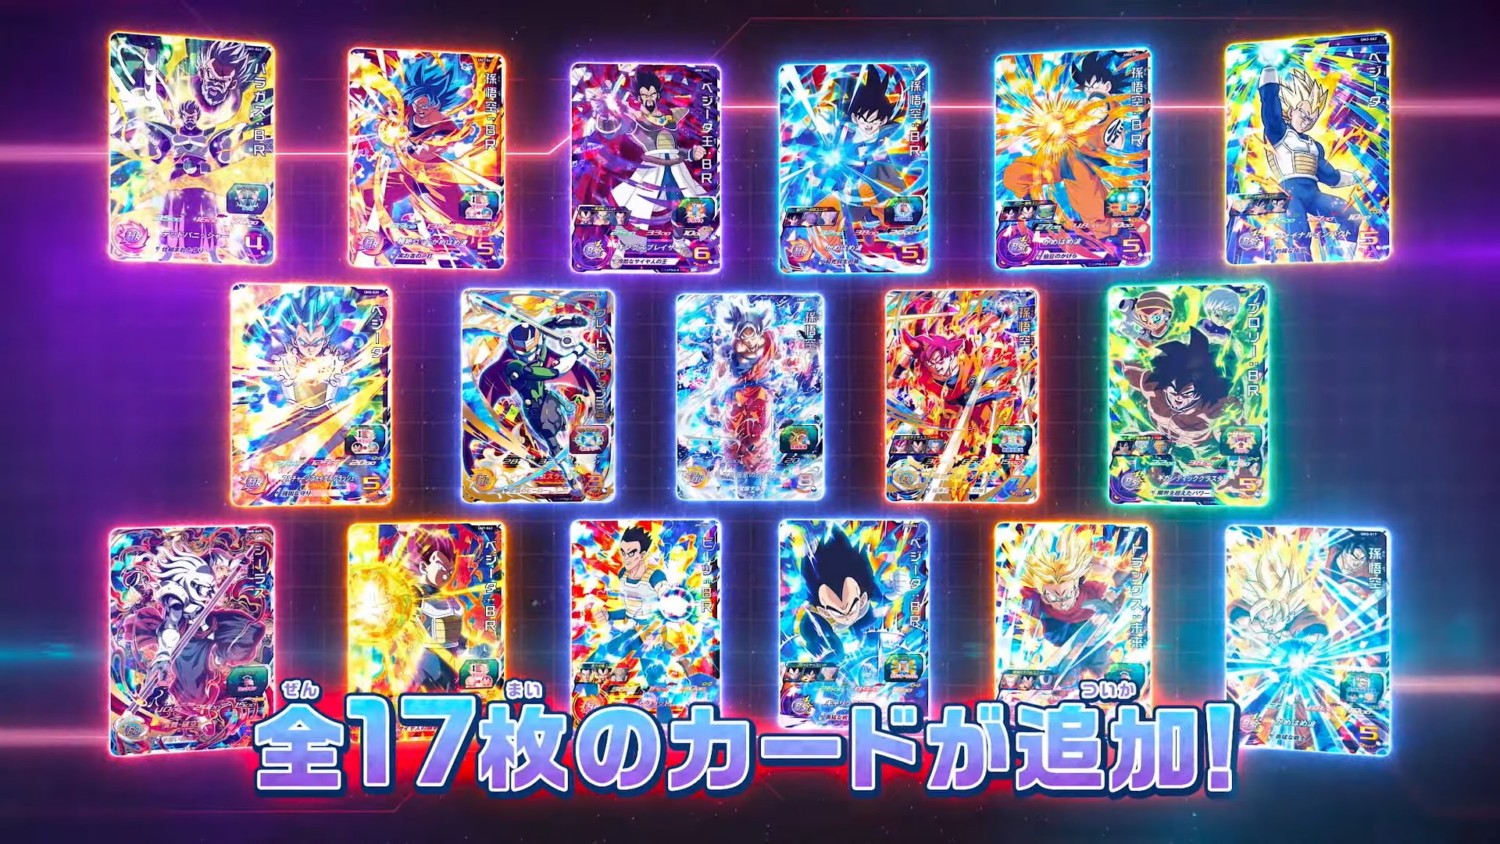 Super Dragon Ball Heroes: World Mission Is A Very Japanese Card Game